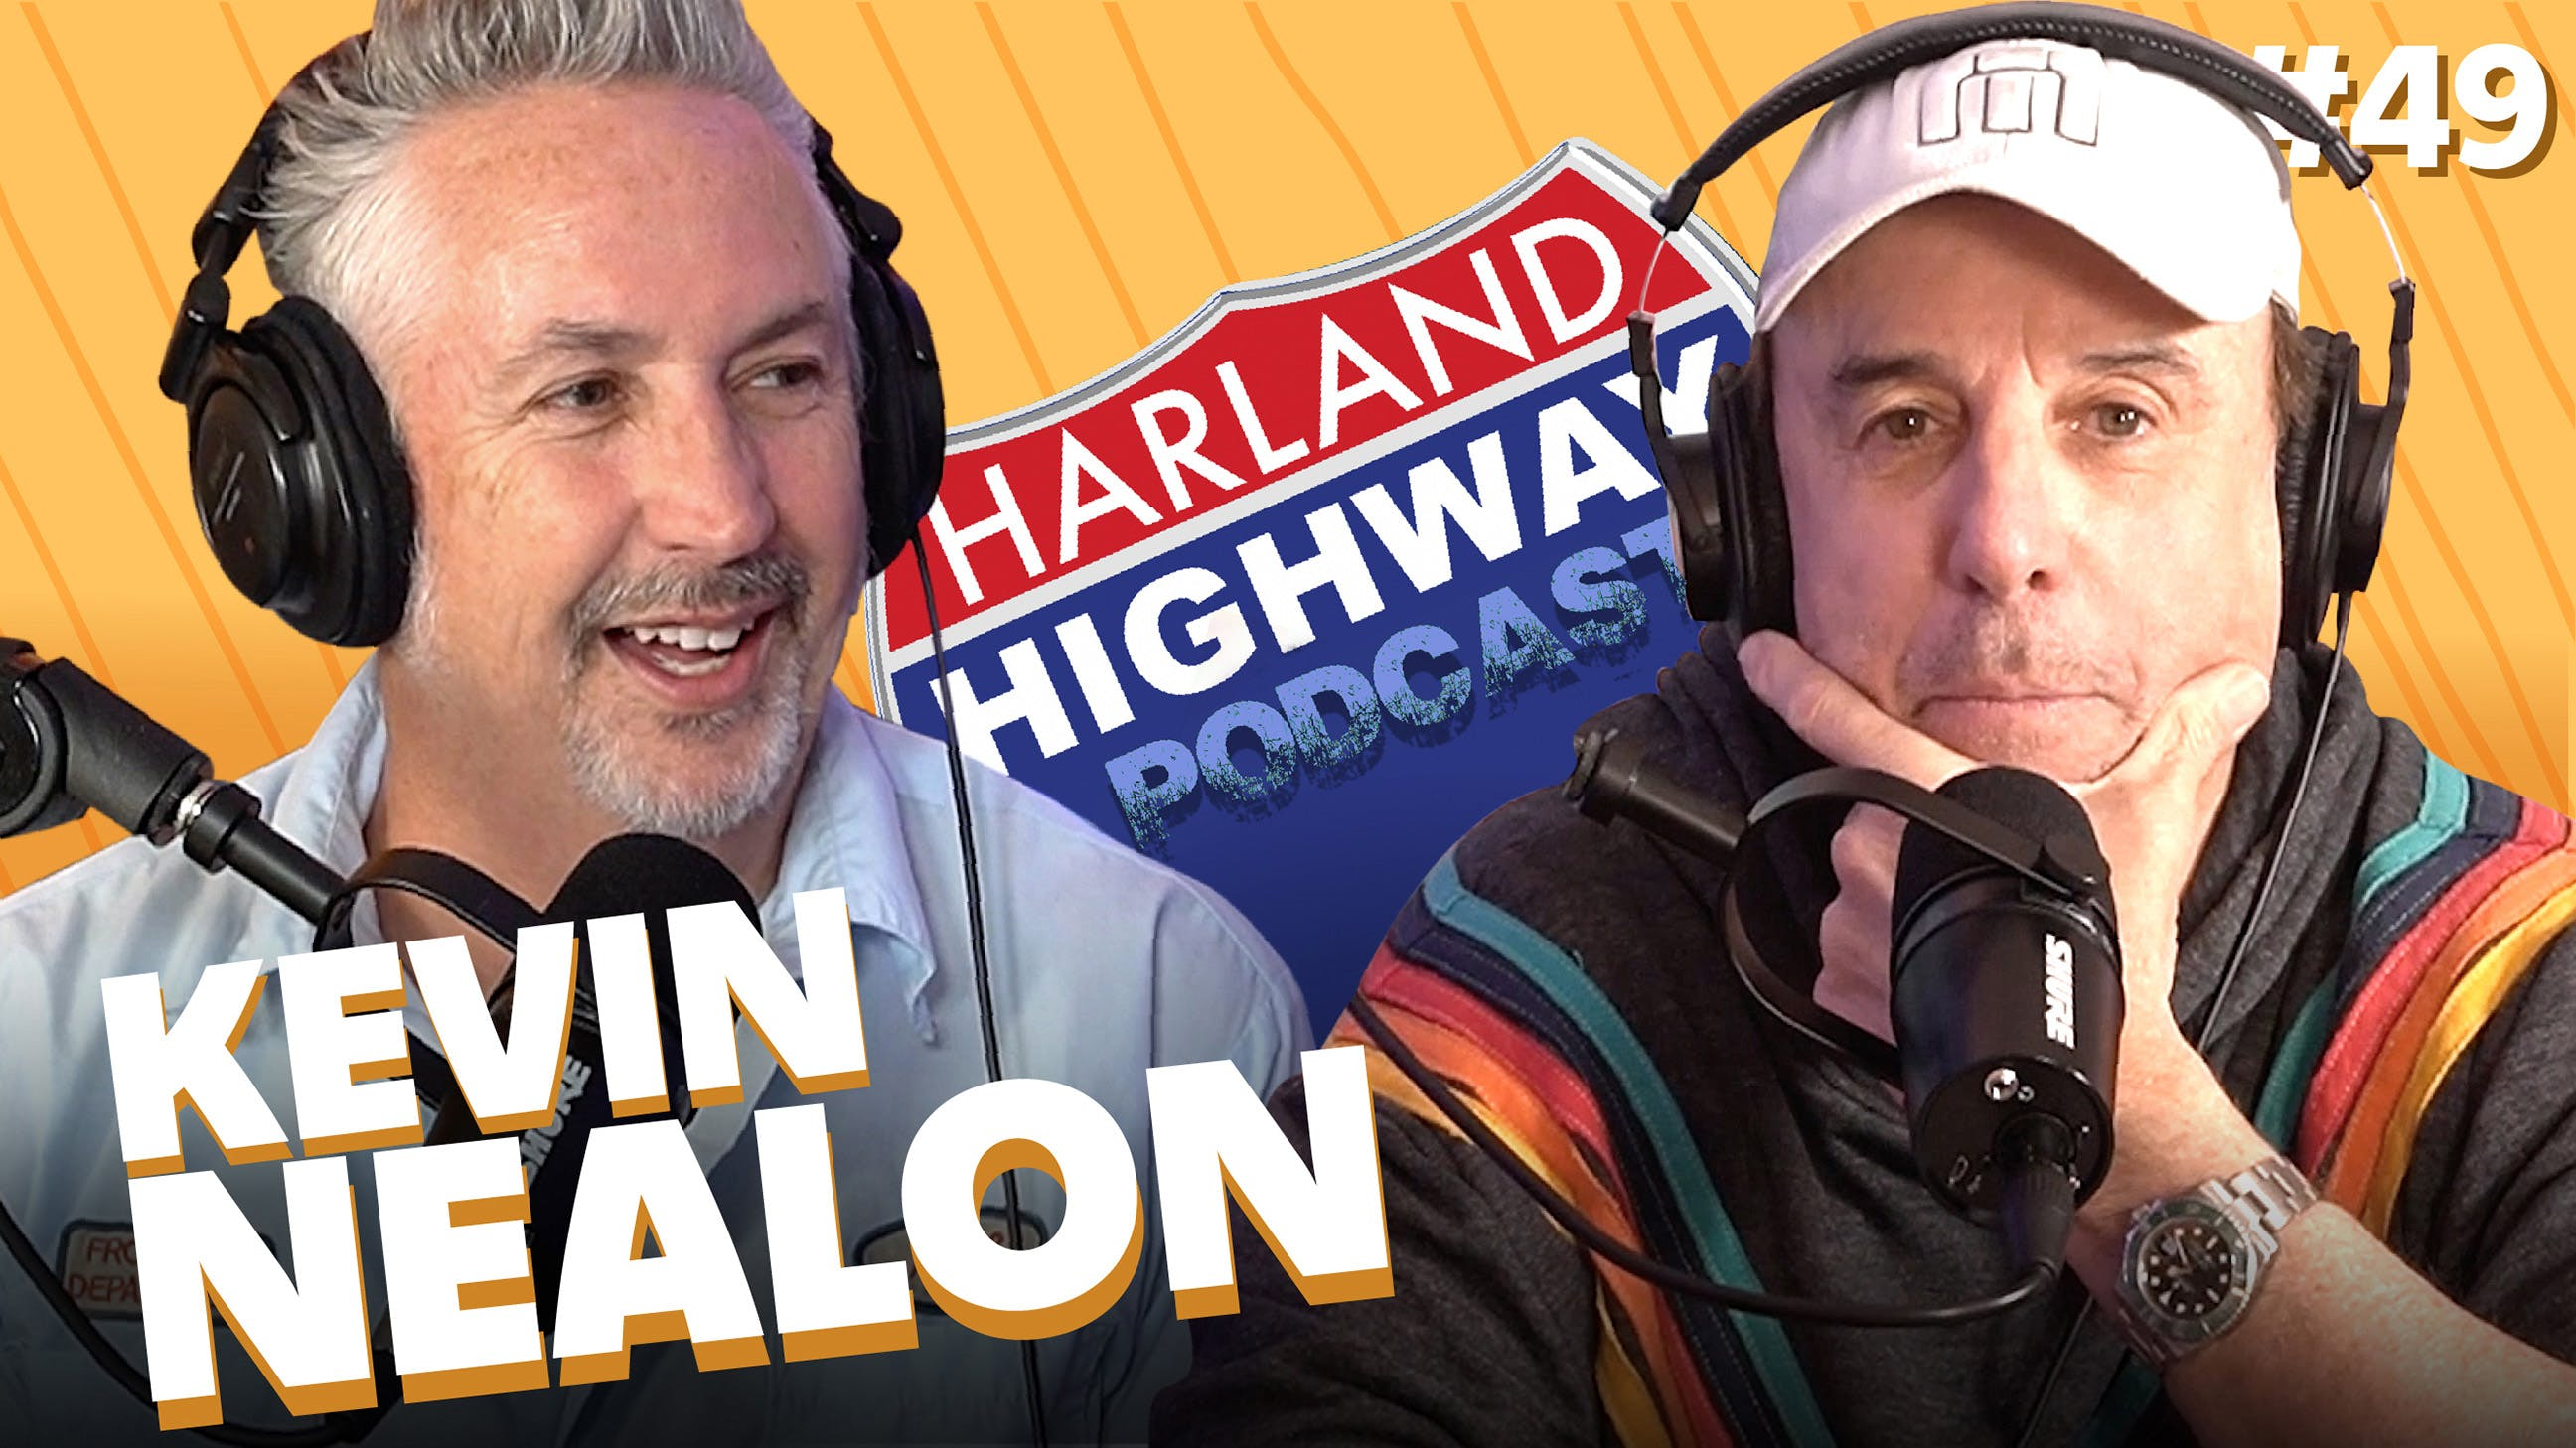 NEW HARLAND HIGHWAY #49 - KEVIN NEALON, Comedian, Actor, Author, SNL alum.